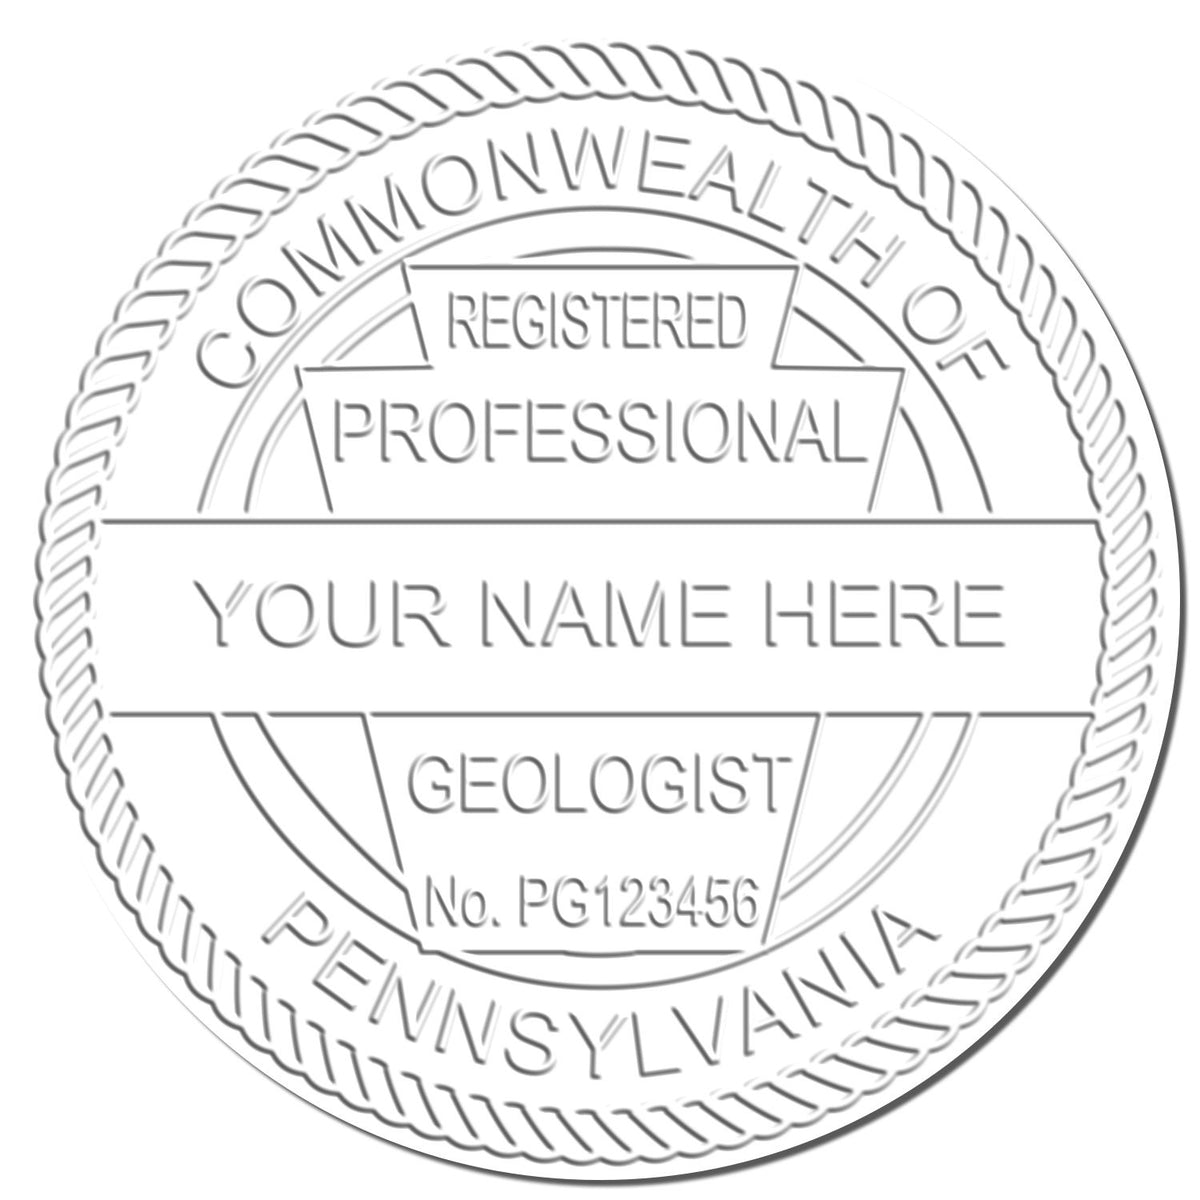 A photograph of the Hybrid Pennsylvania Geologist Seal stamp impression reveals a vivid, professional image of the on paper.